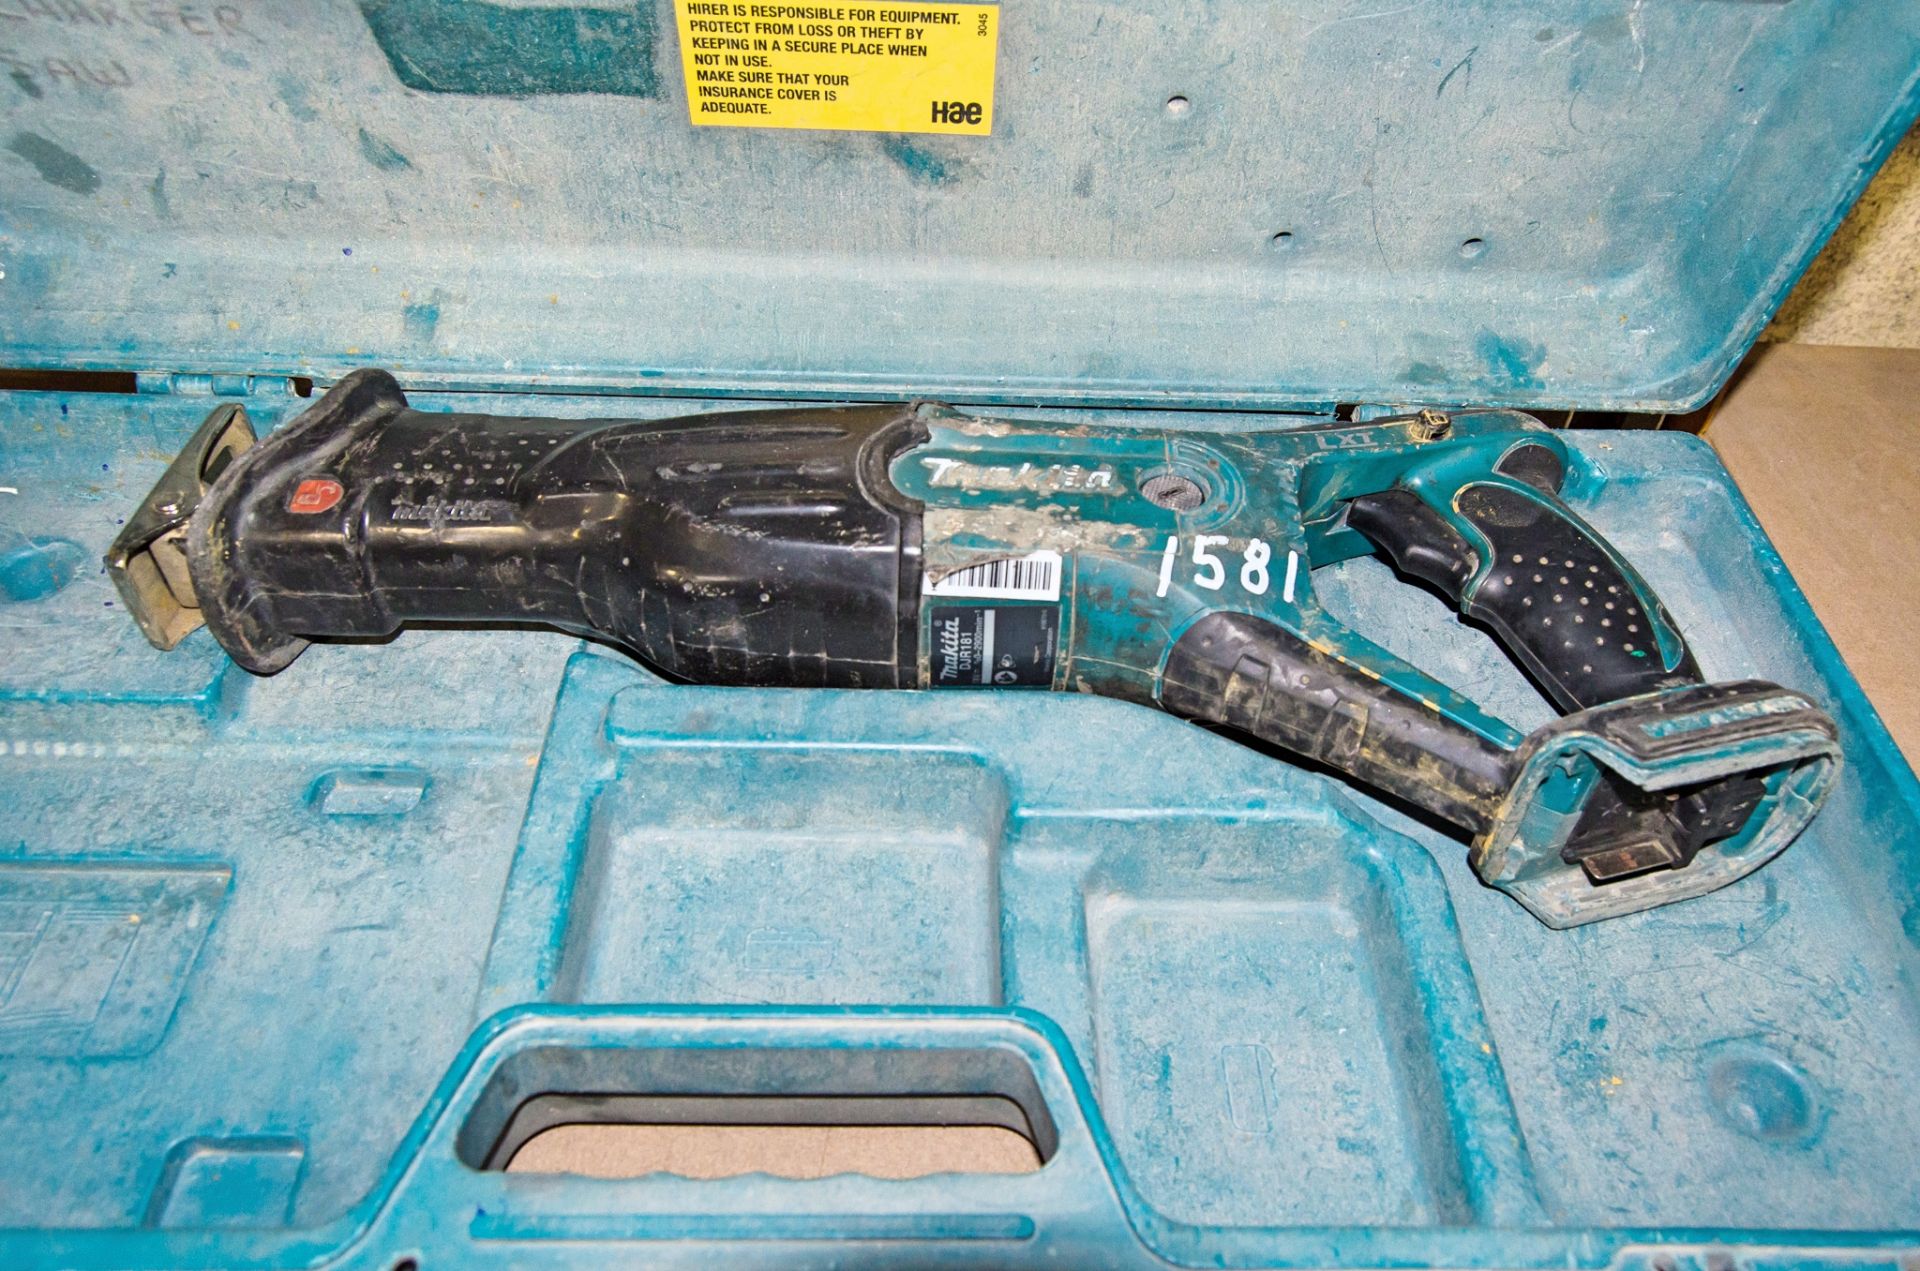 Makita DJR181 18v cordless reciprocating saw c/w carry case ** No battery or charger ** 02310151